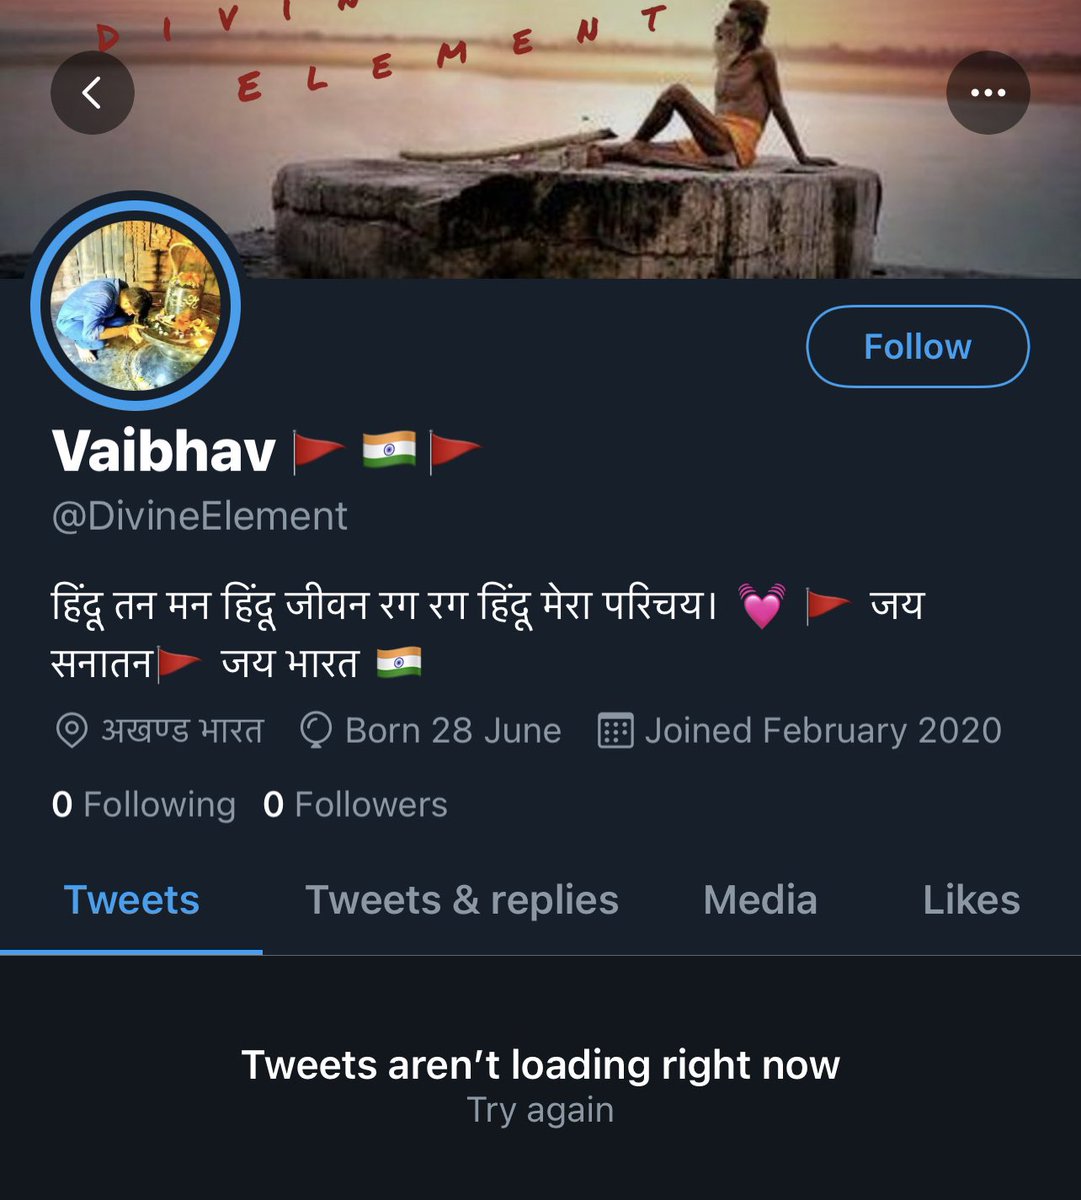 Hey @TwitterIndia @TwitterSupport what's the reason behind the suspension of @DivineElement ?
He posts about temples and Santana dharma only. 
No abuse no troll then why u suspended @DivineElement??
Please restore his account.